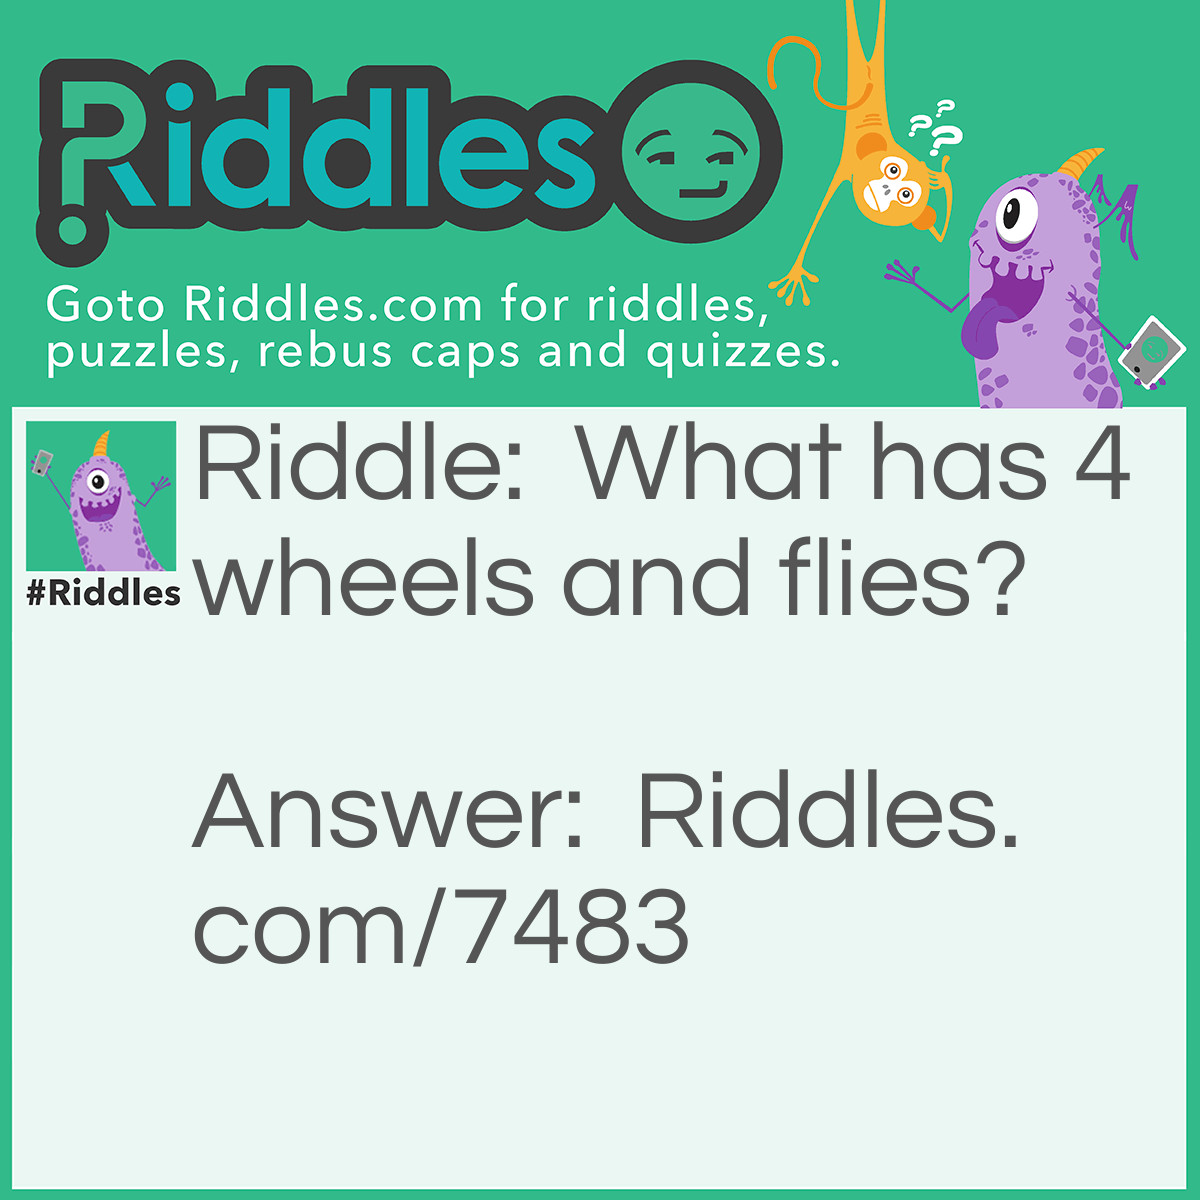 Riddle: What has 4 wheels and flies? Answer: A garbage truck! lol!